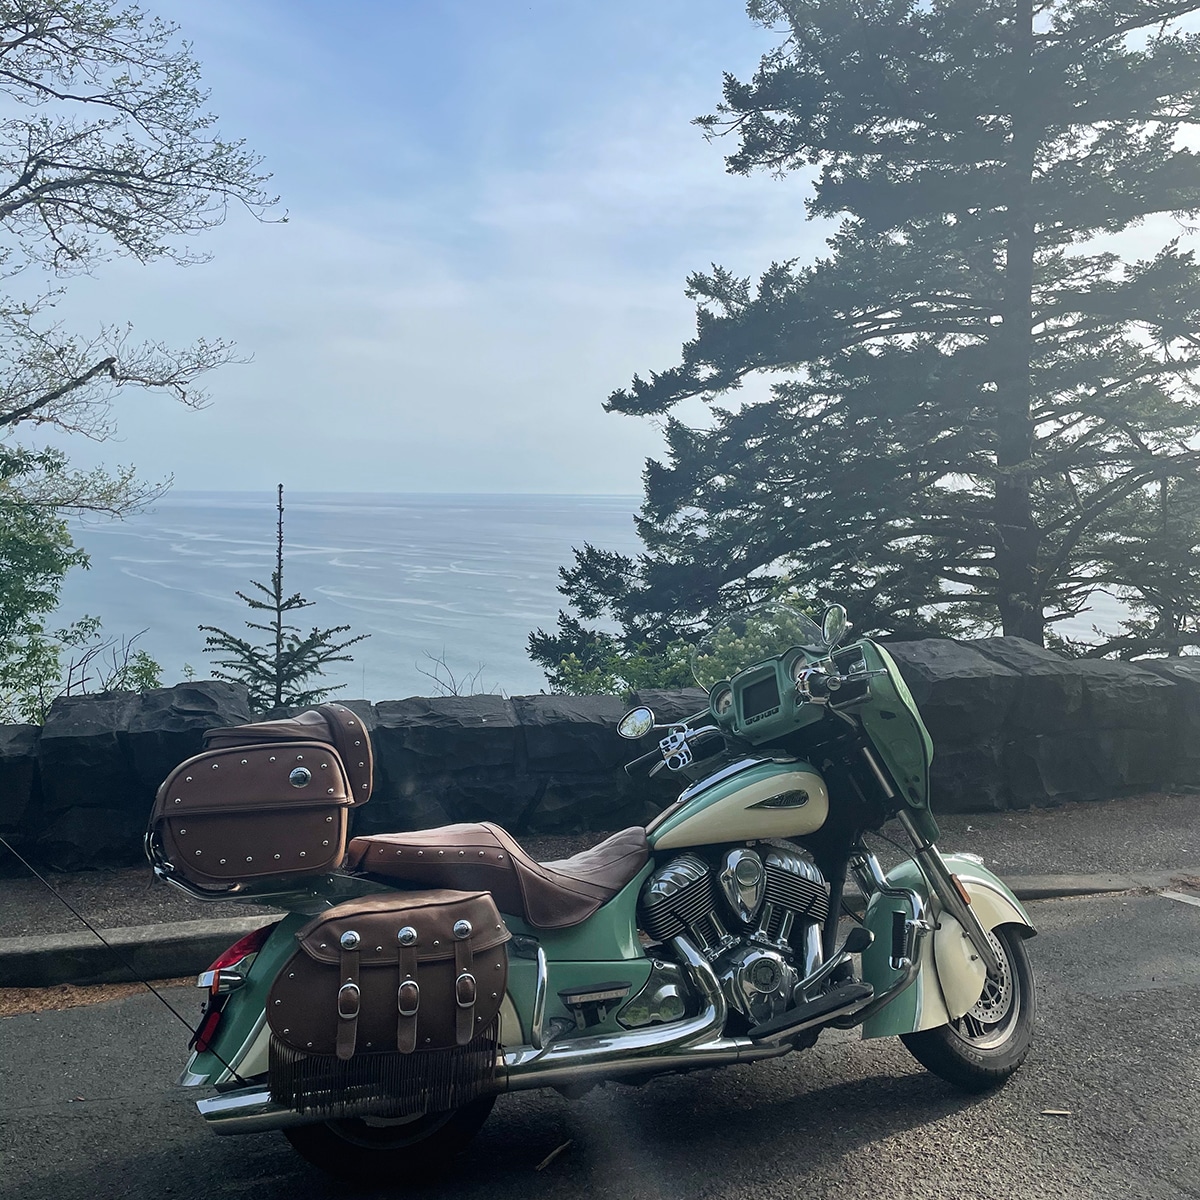 Our Indian Motorcycle parked on the Oregon Coast near Nehalem Bay State Park.